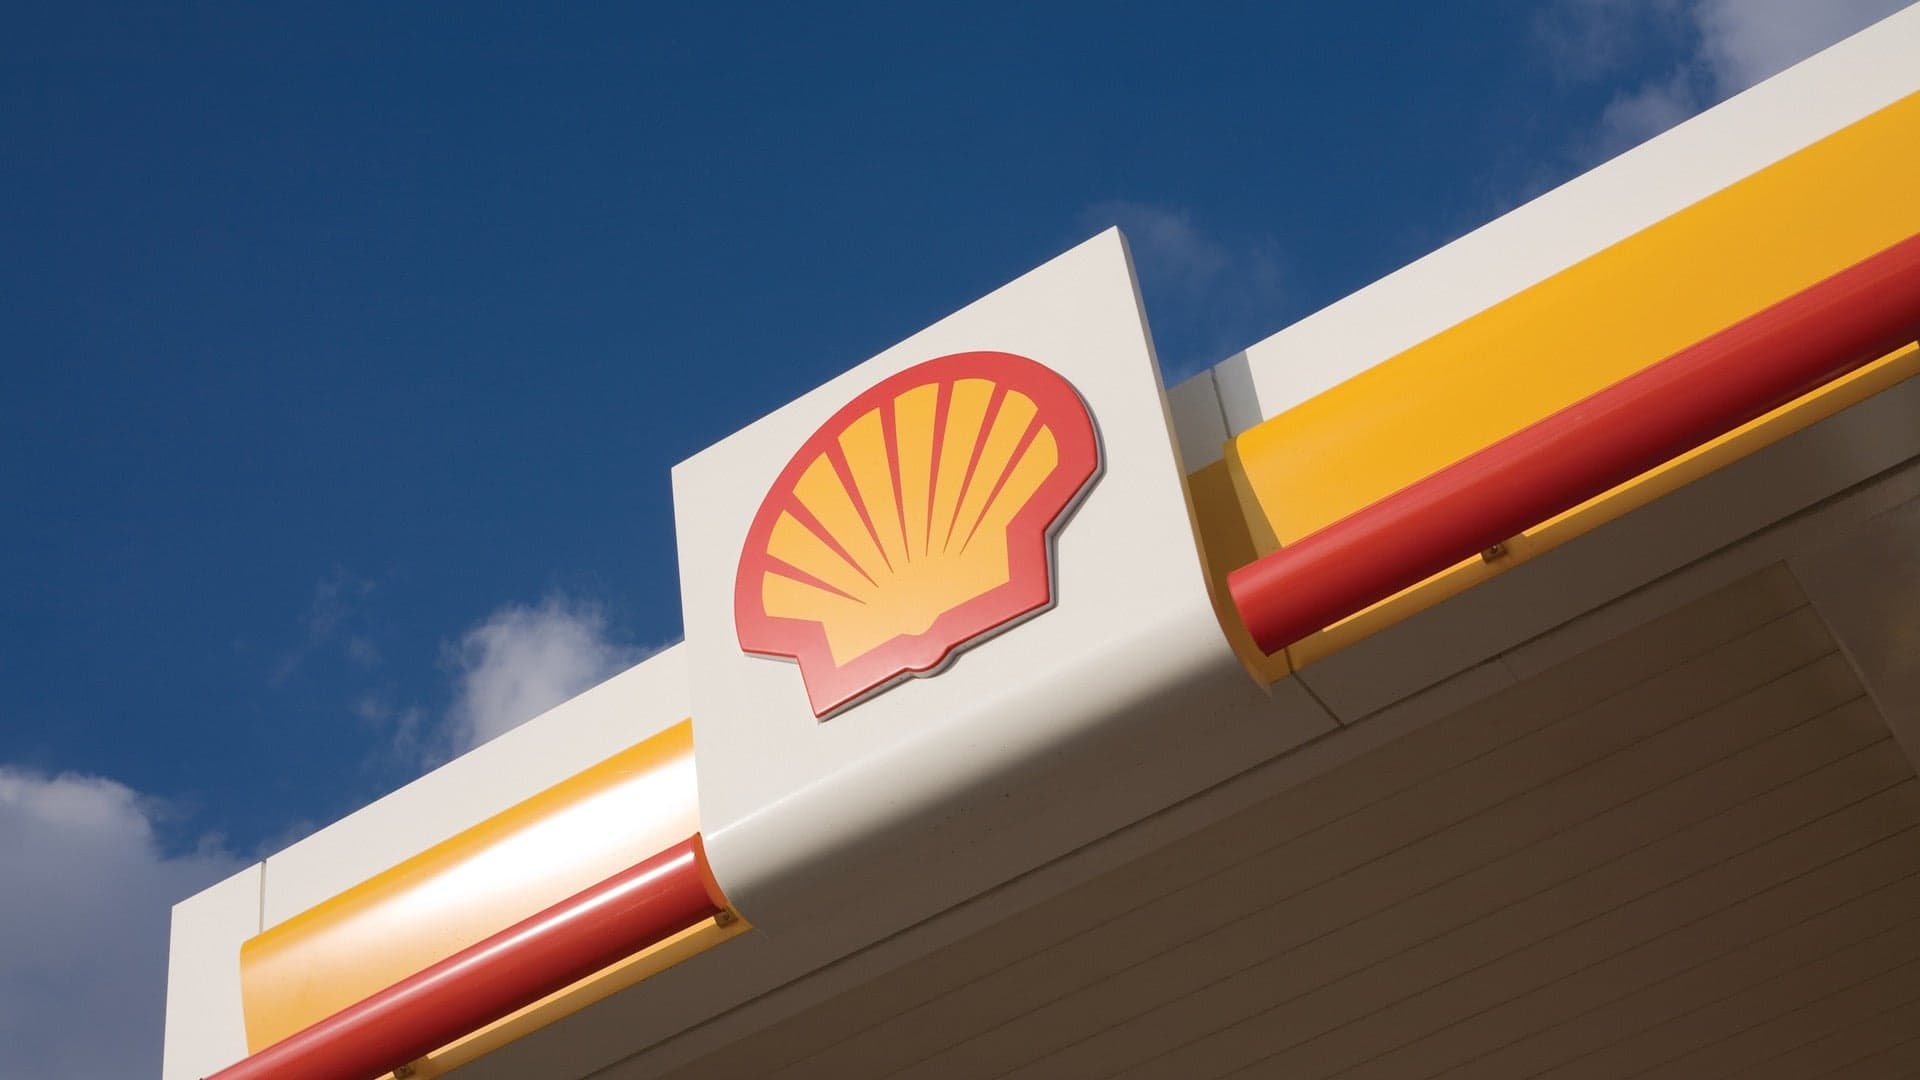 Gas Company Shell Joins Effort to Build a European Fast-Charging Network